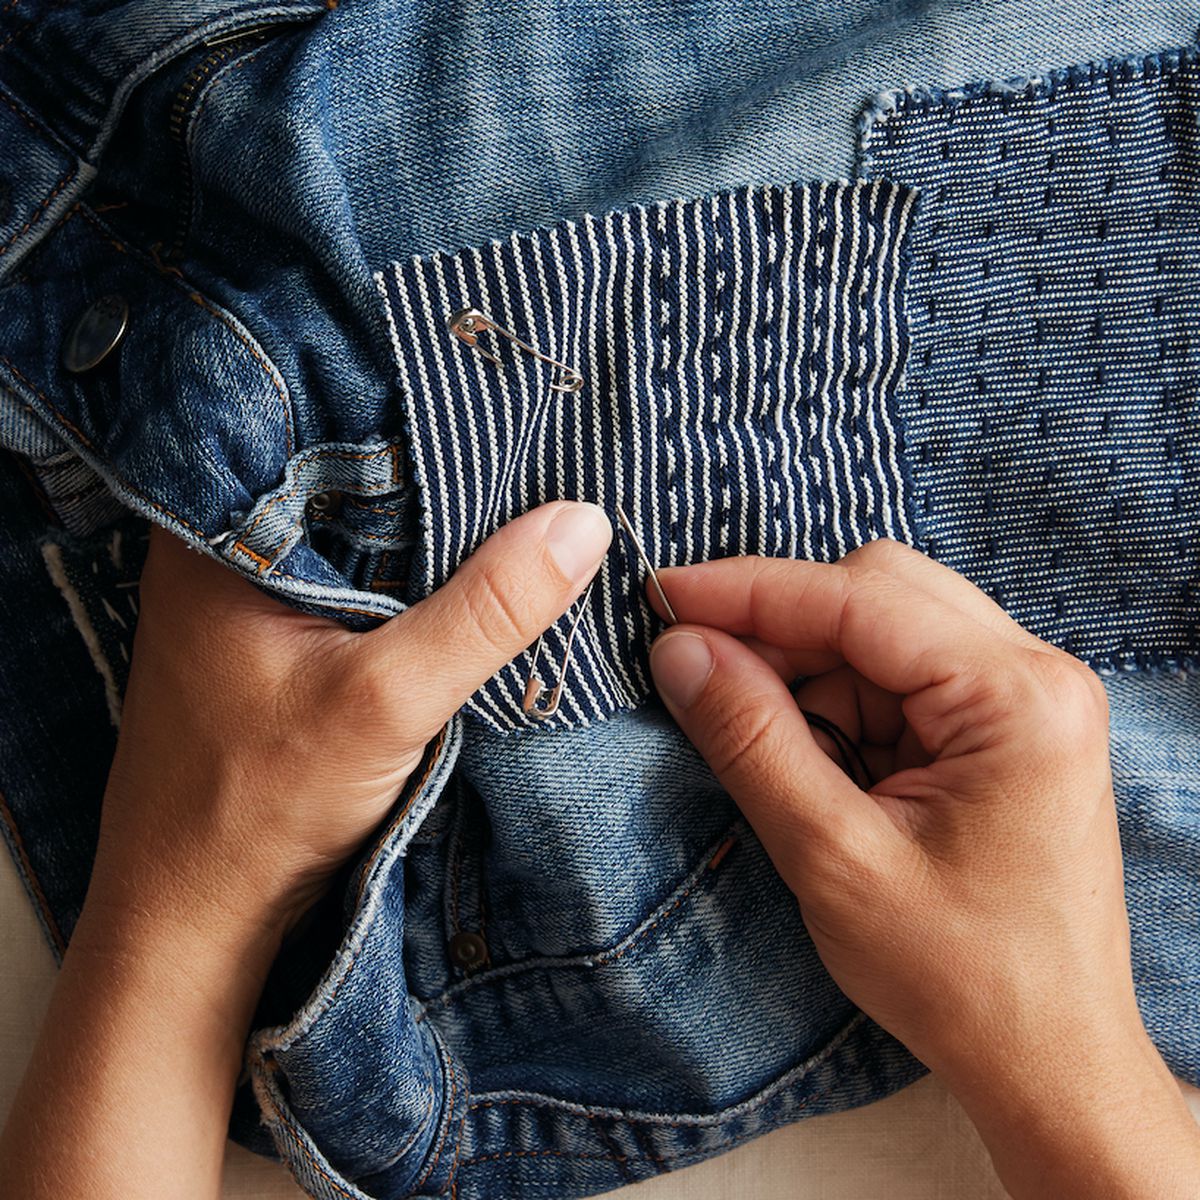 Mending Clothes: Creative Ways to Sew a Hole, Mend a Seam, and Beyond